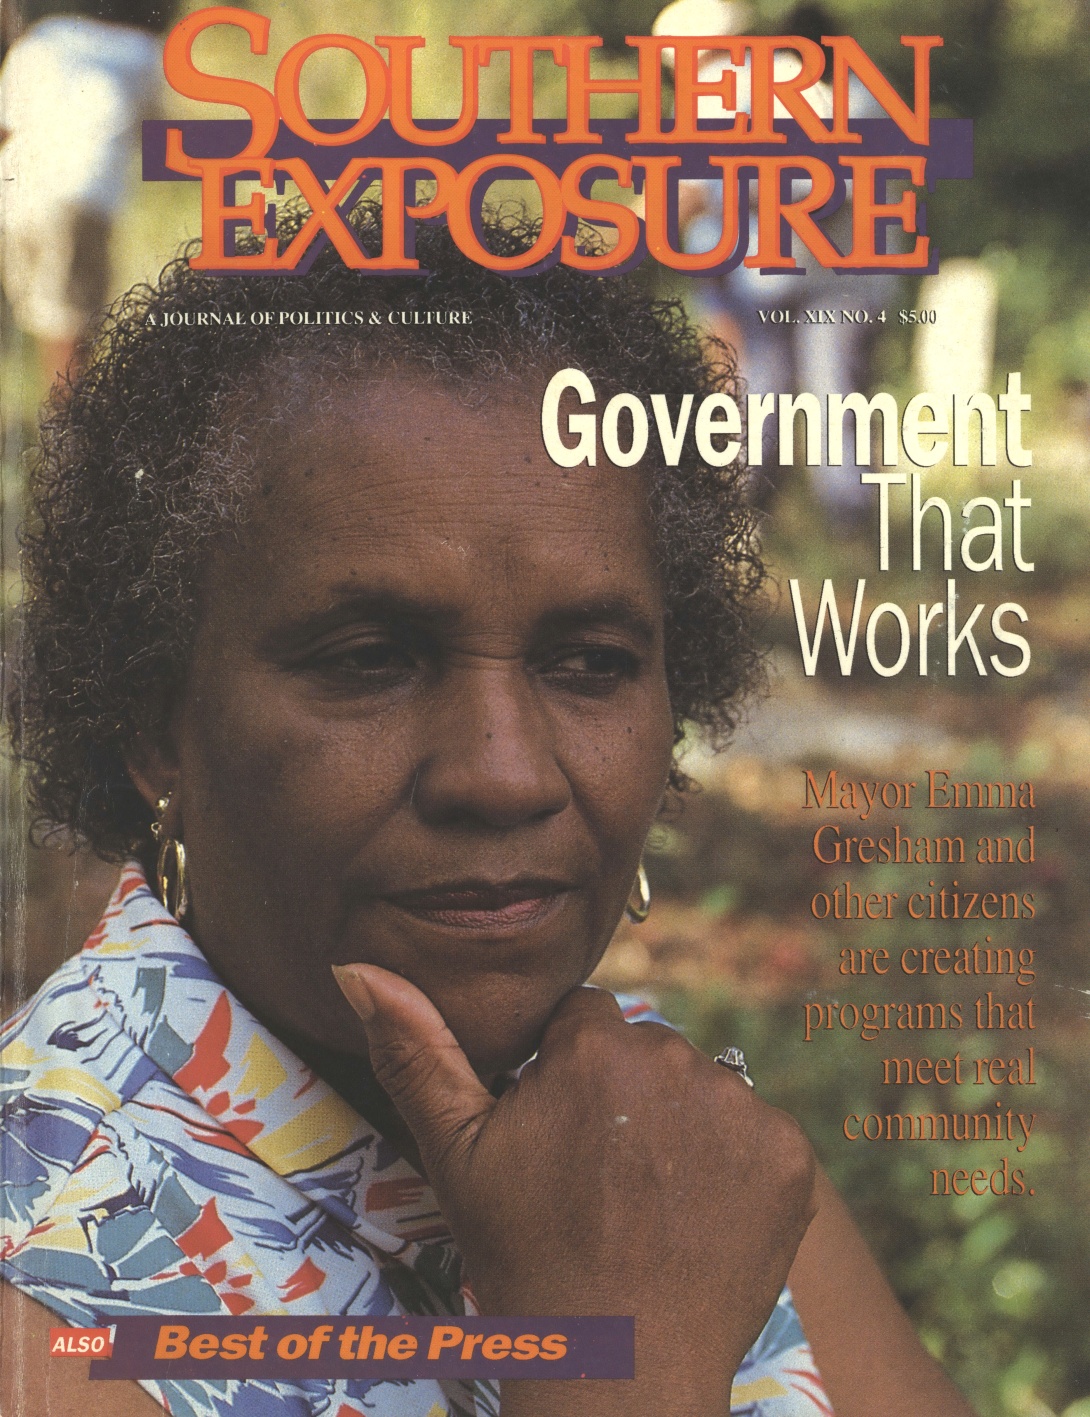 Magazine cover with photo of older Black woman, text reads "Government That Works"